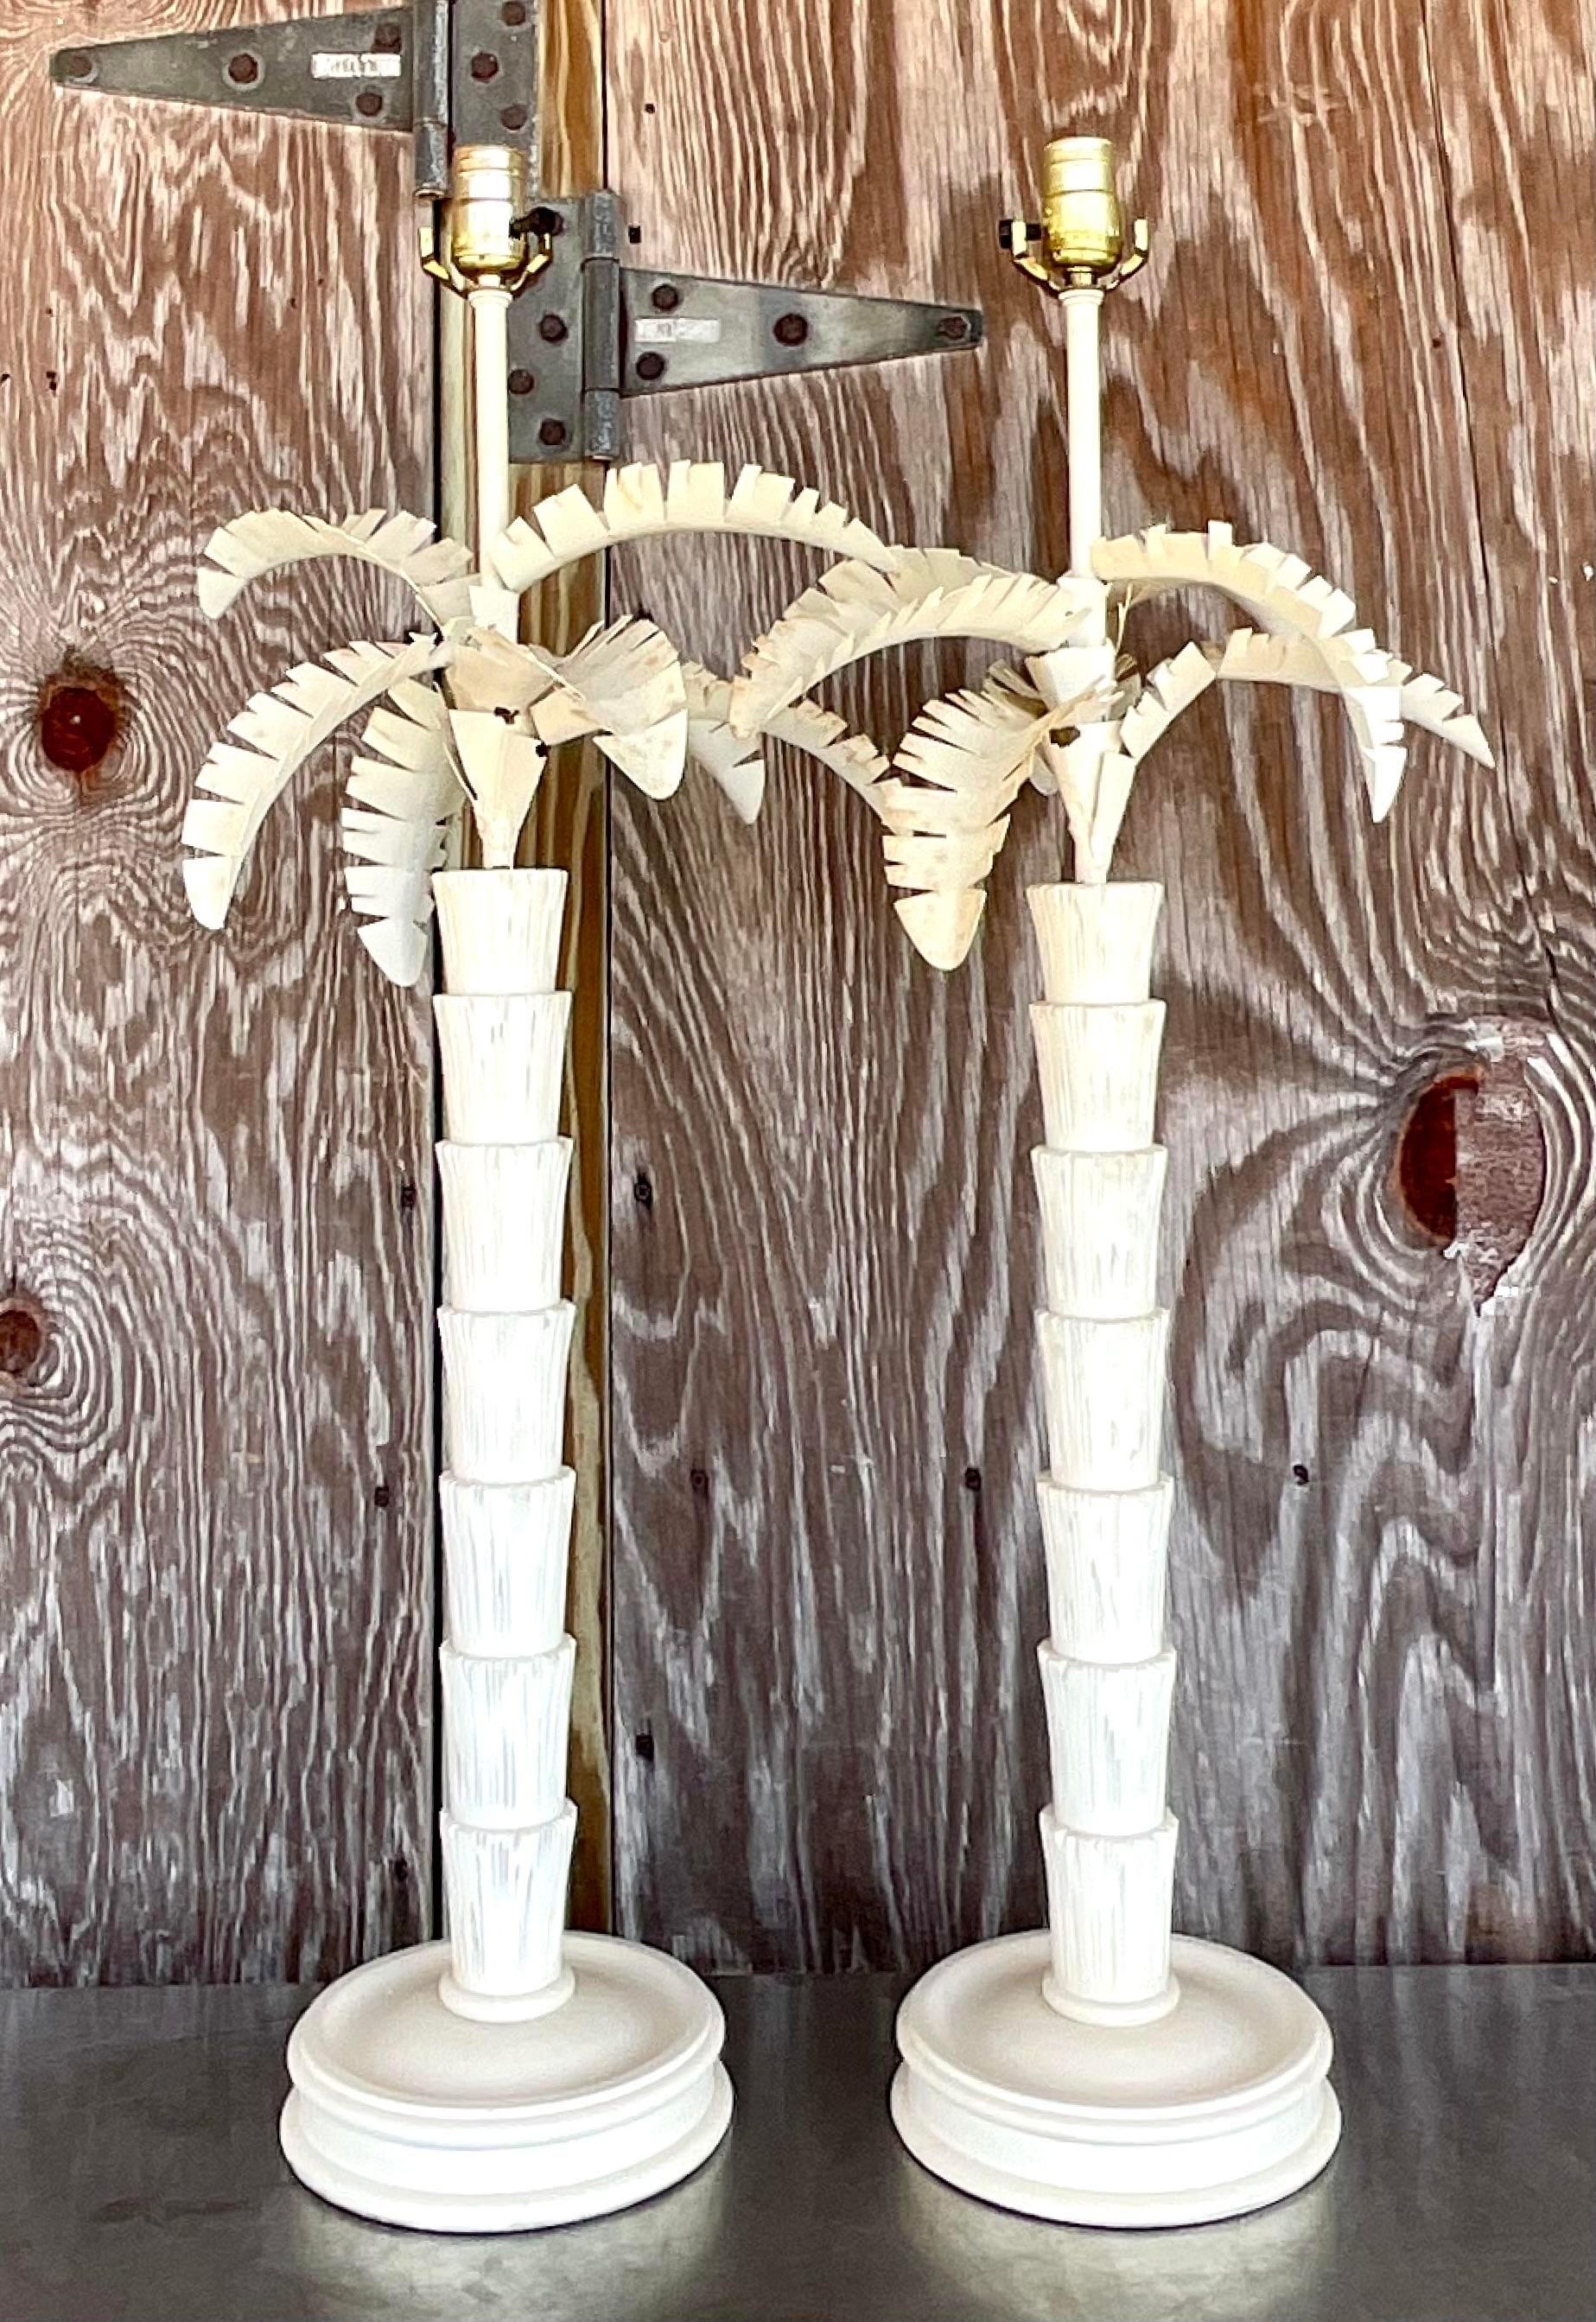 Illuminate your coastal retreat with this captivating pair of Vintage Coastal Punch Cut Metal Palm Tree Lamps. Evoking the relaxed elegance of American coastal living, these lamps blend intricate punch cut metalwork with the iconic silhouette of